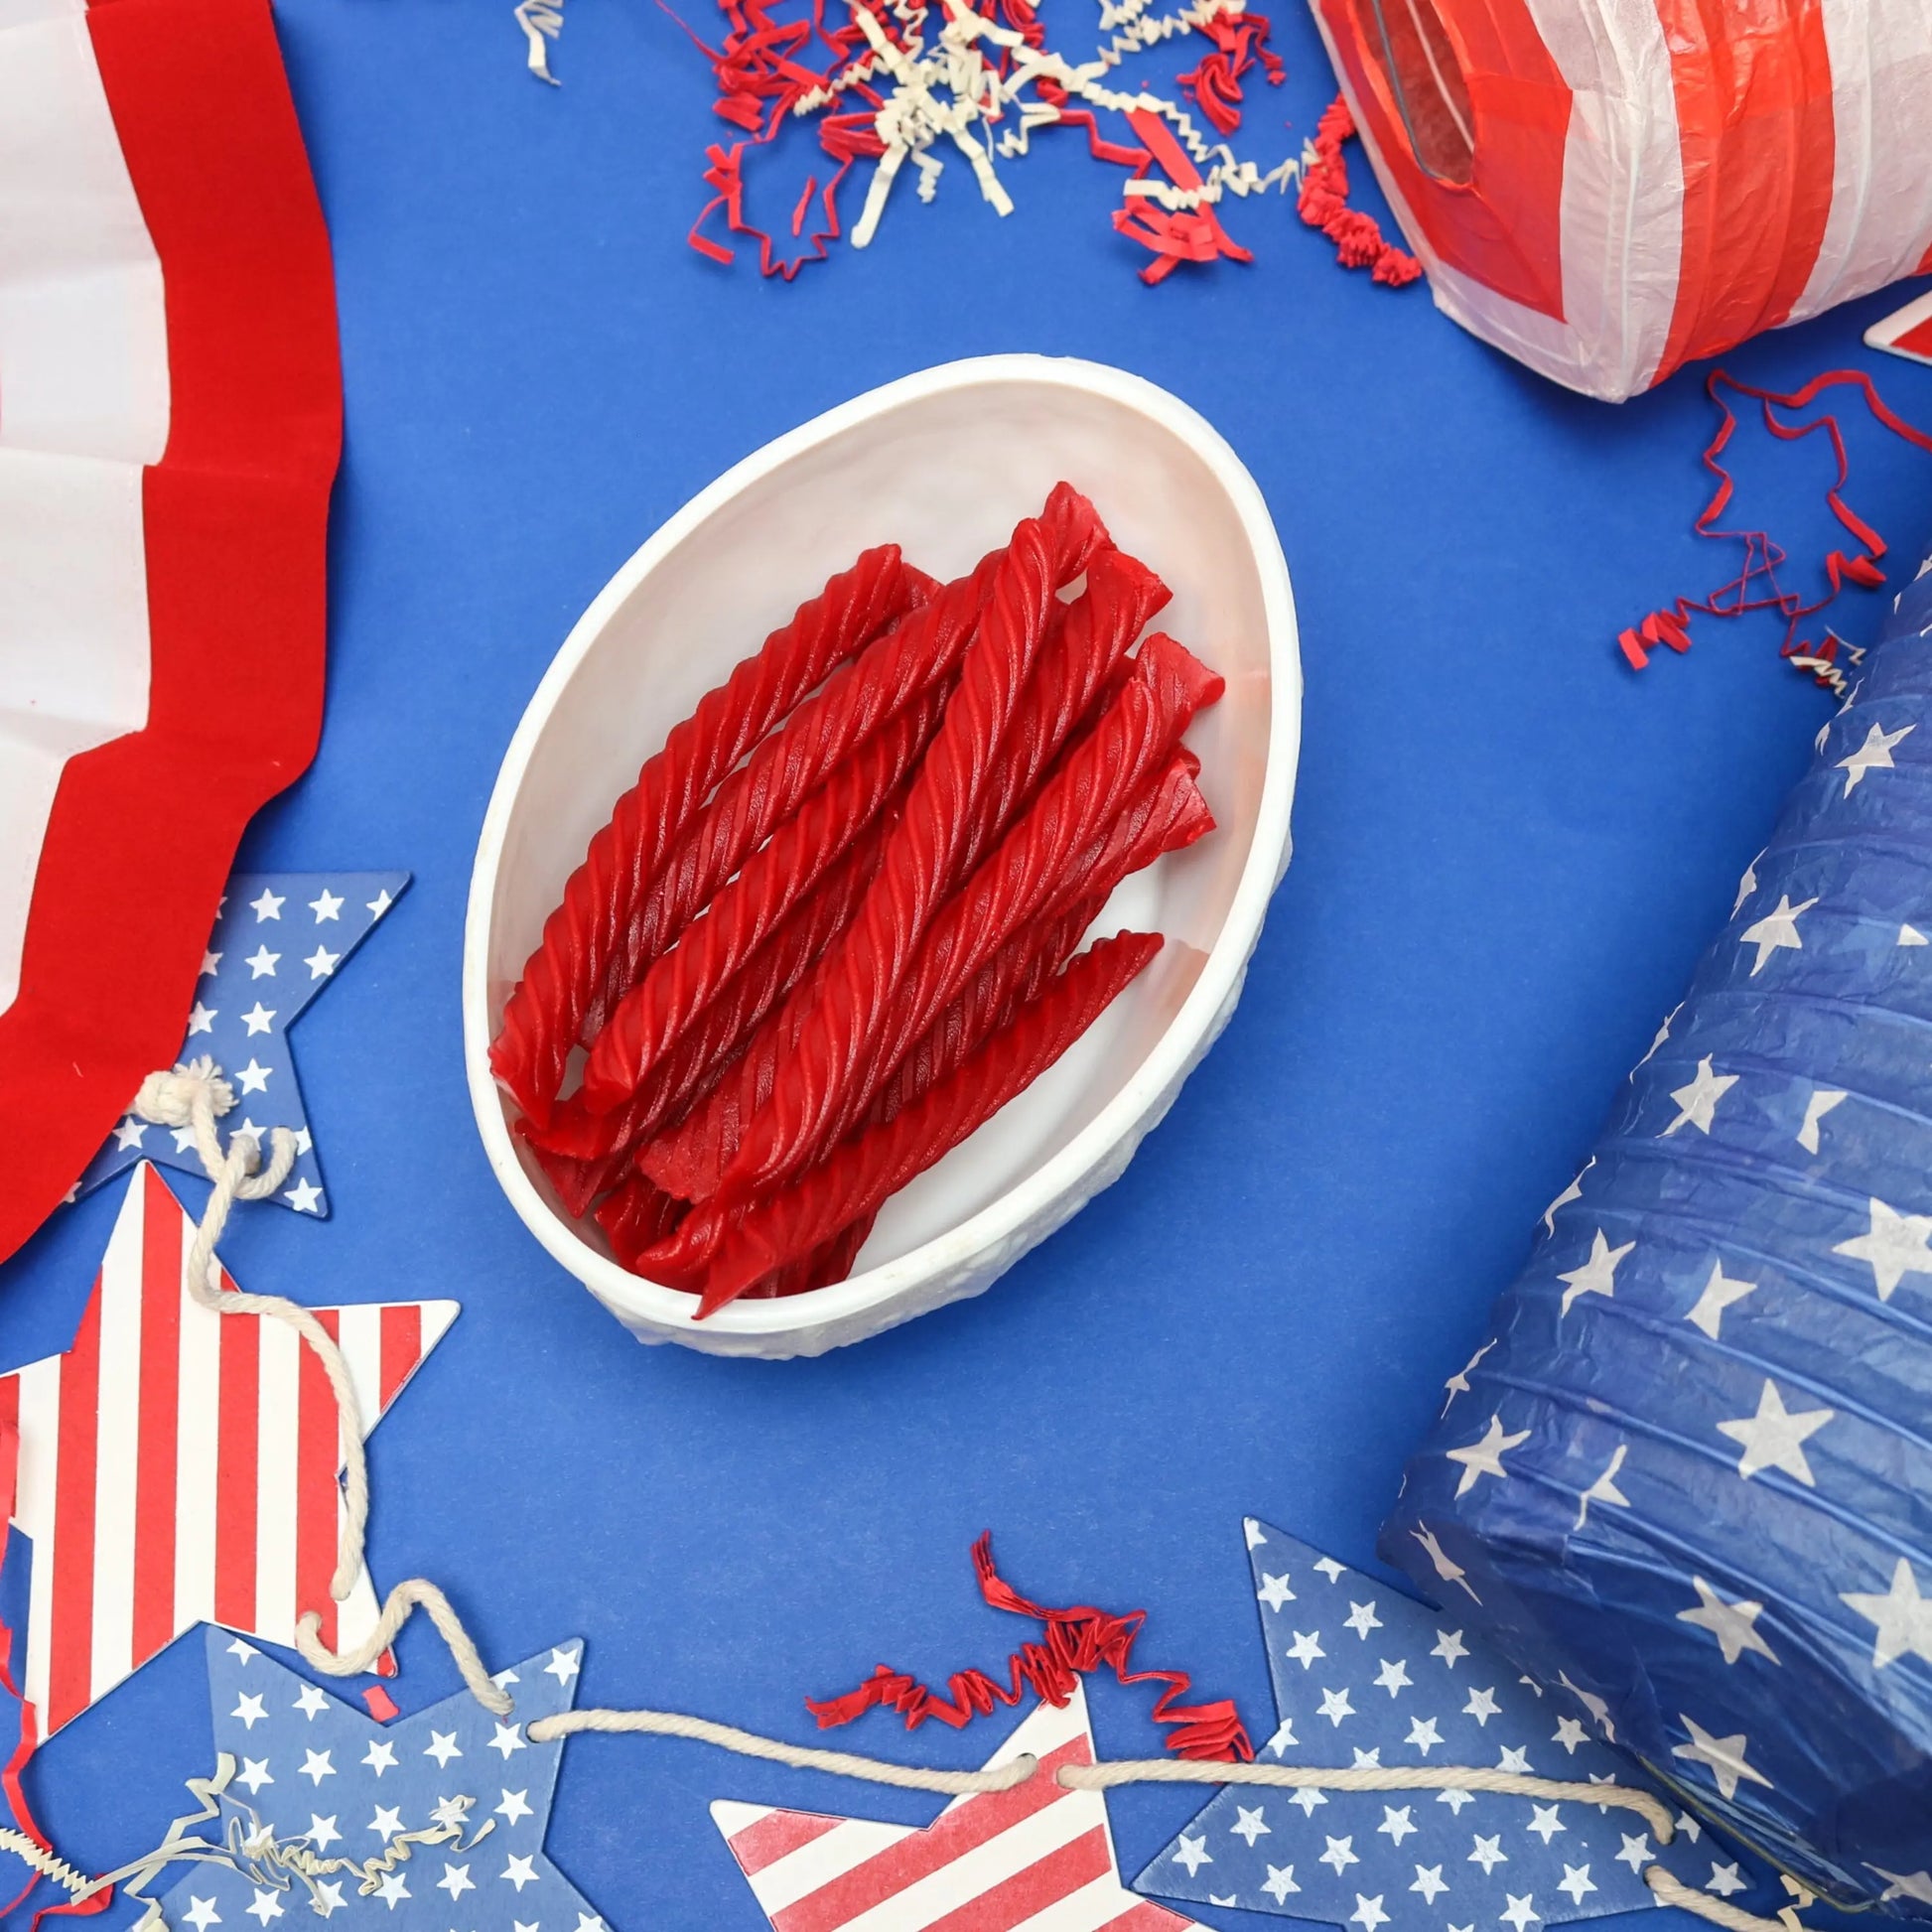 Red Vines Original Red Jumbo Twists in a patriotic scene with red, white and blue decorations